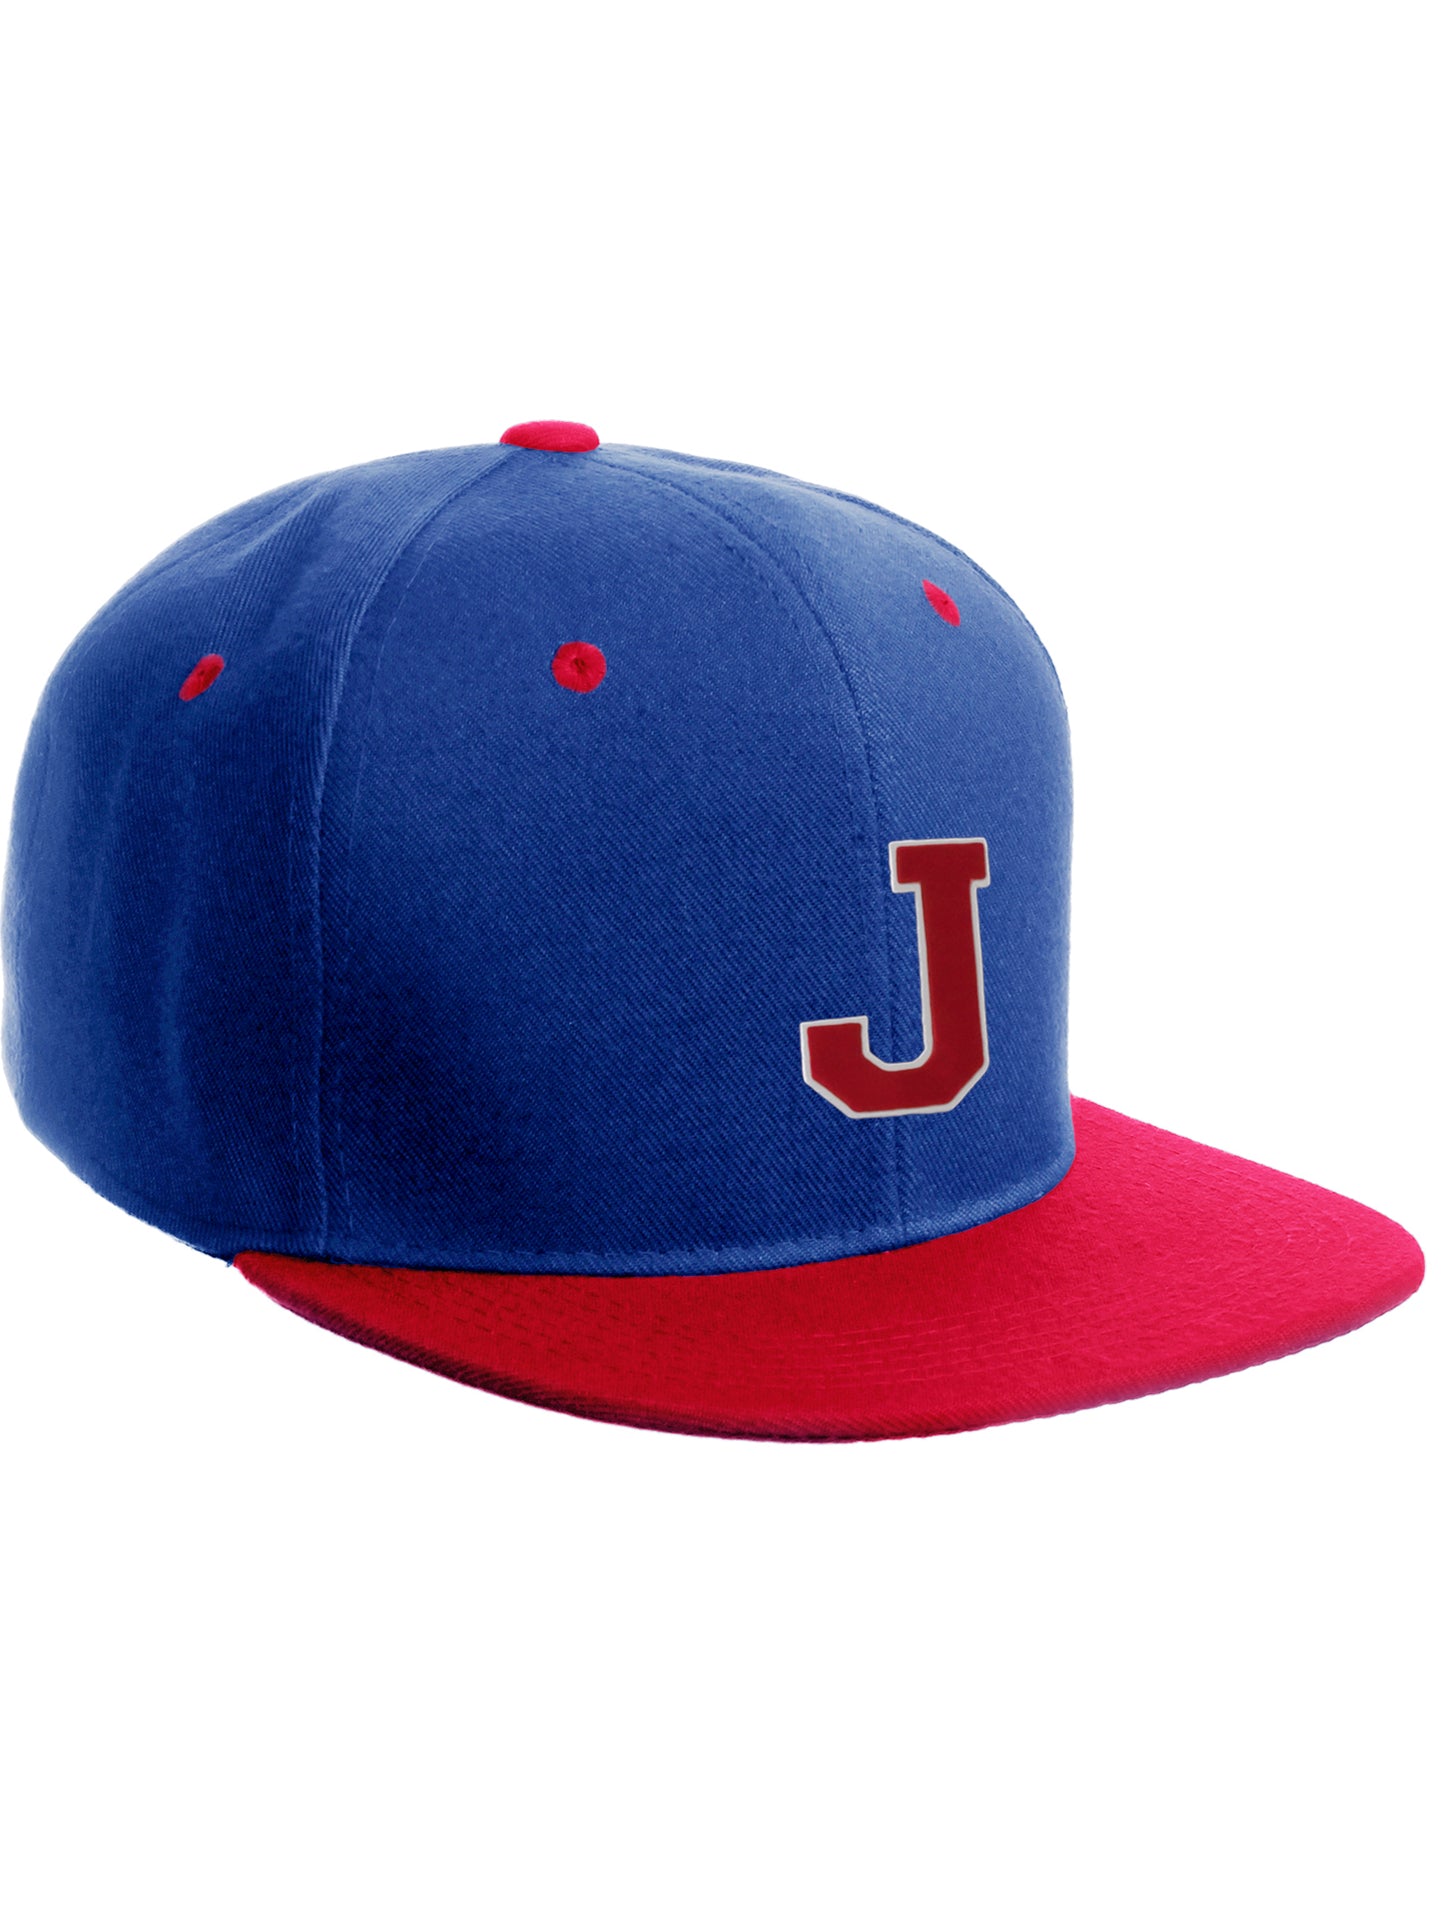 Classic Snapback Hat Custom A to Z Initial Letters, Royal Red Cap White Red